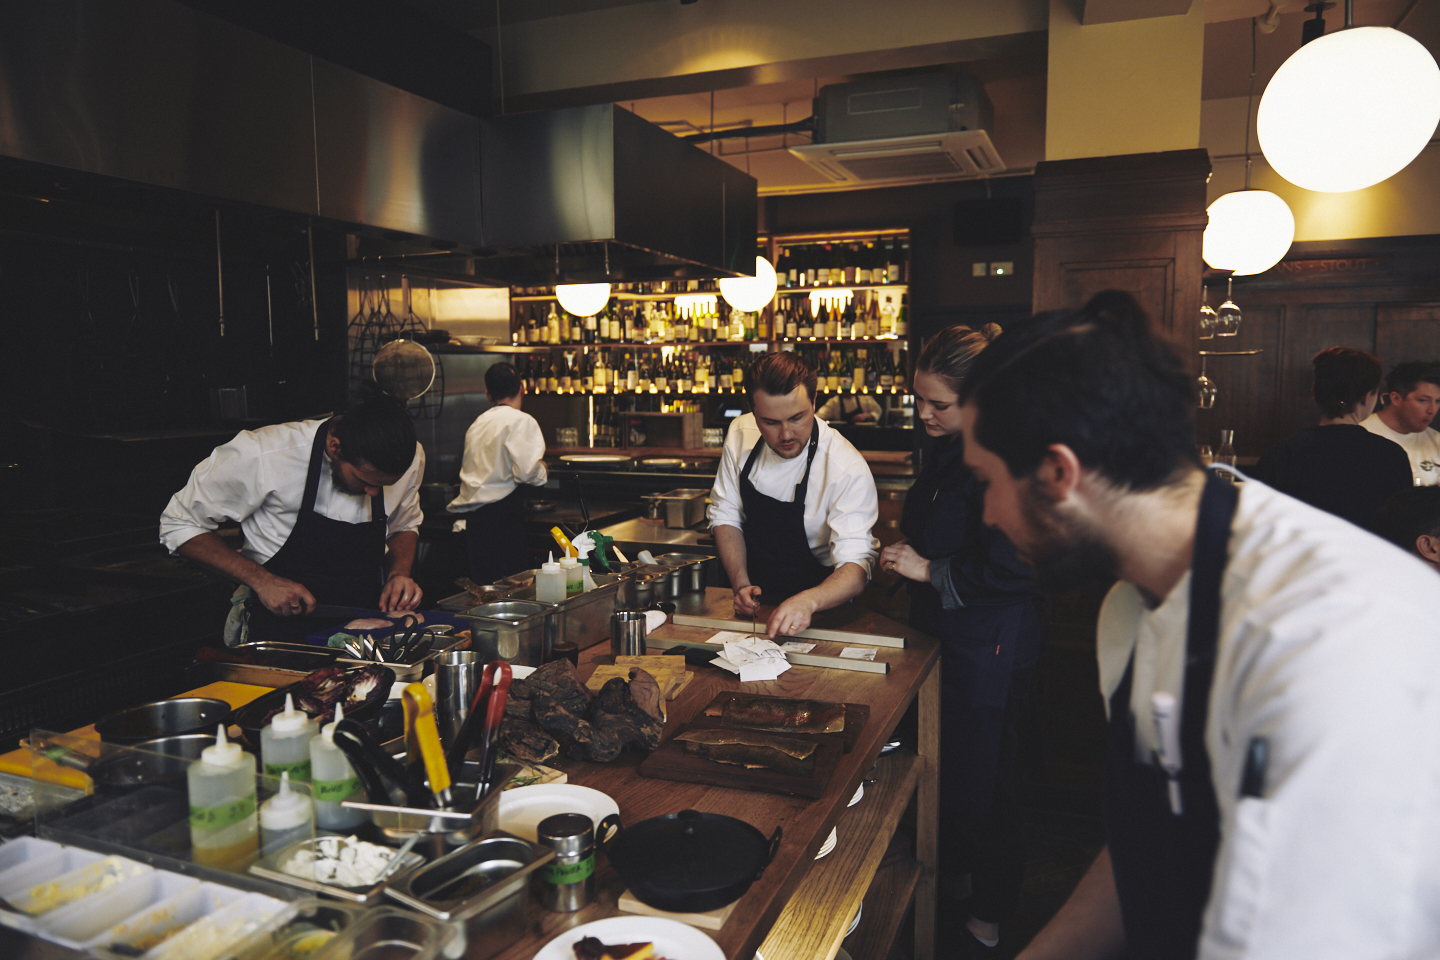 Chefs stand and work in blue aprons and whites at the pass at Brat restaurant Shoreditch